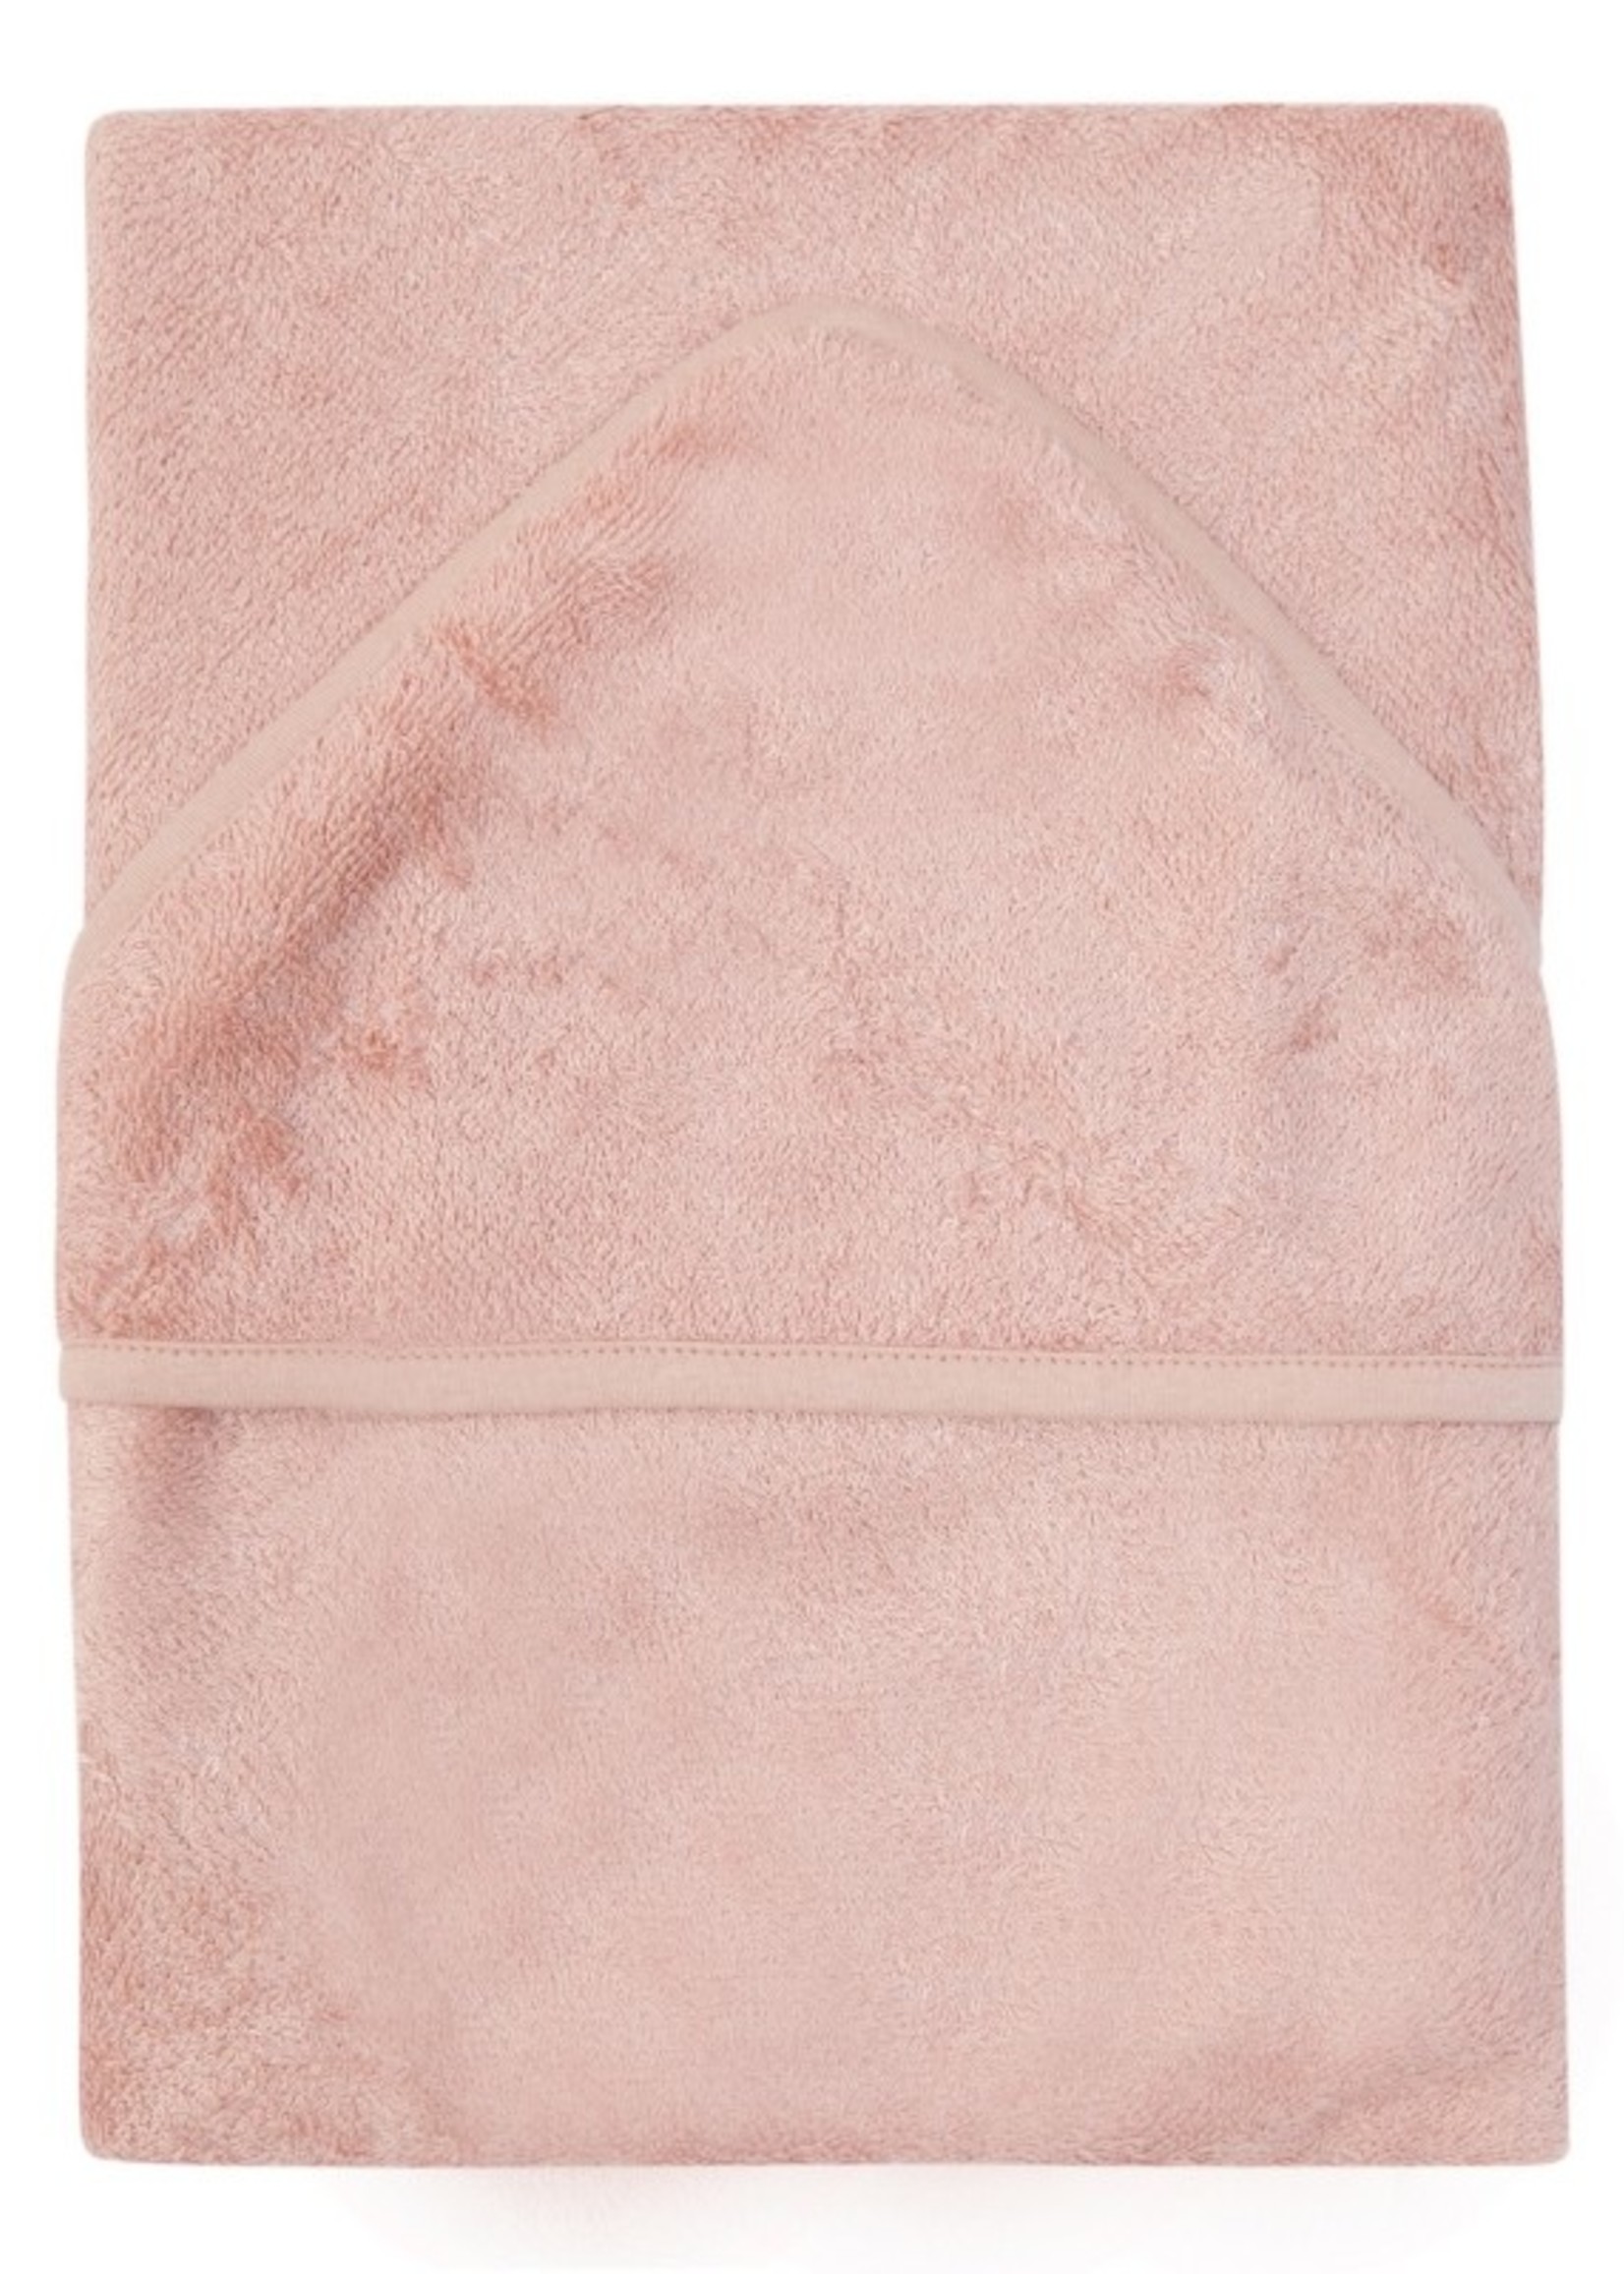 Timboo Hooded towel XL - Misty Rose